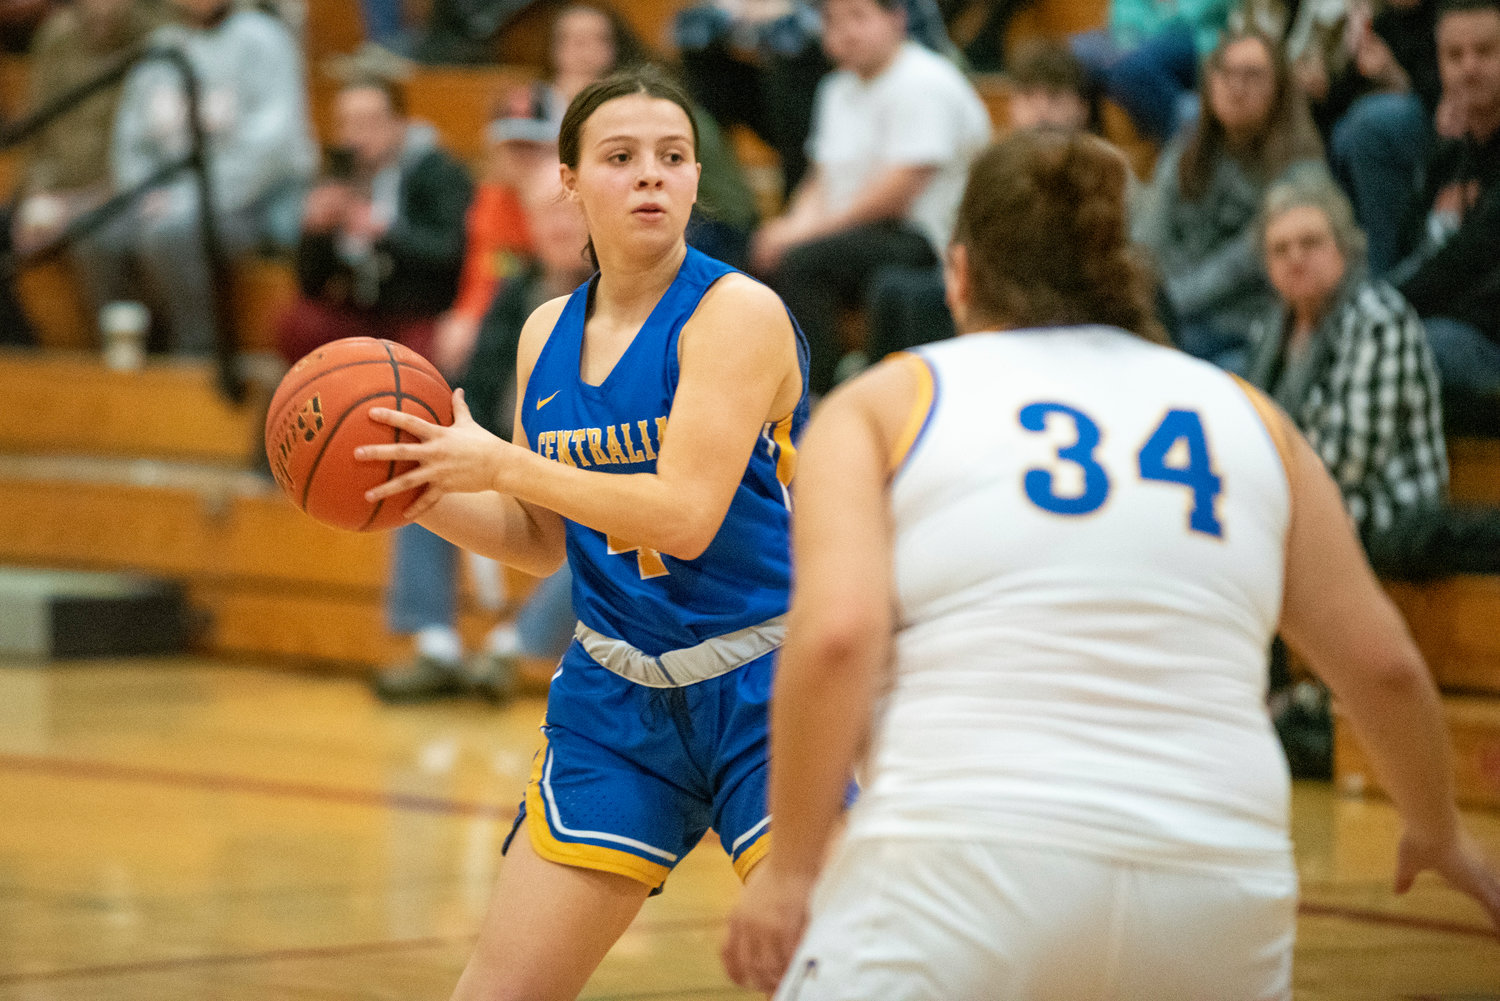 Centralia's Jadyn Hawley (4) looks for an open pass during the SWW Senior All-Star Game on March 26.